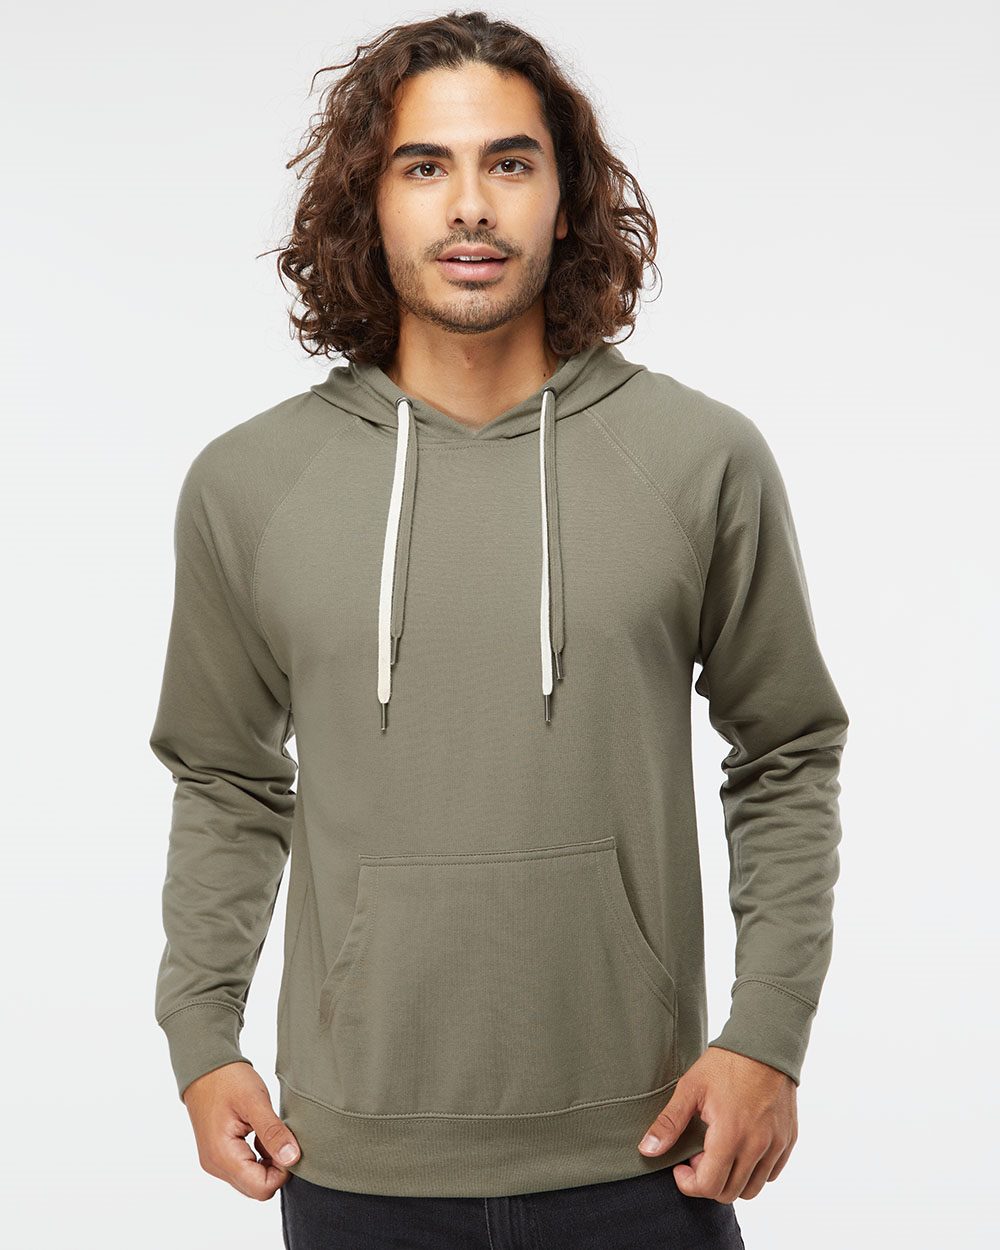 - SS1000 Co. Loopback Sweatshirt Trading Hooded Icon Independent Lightweight Terry